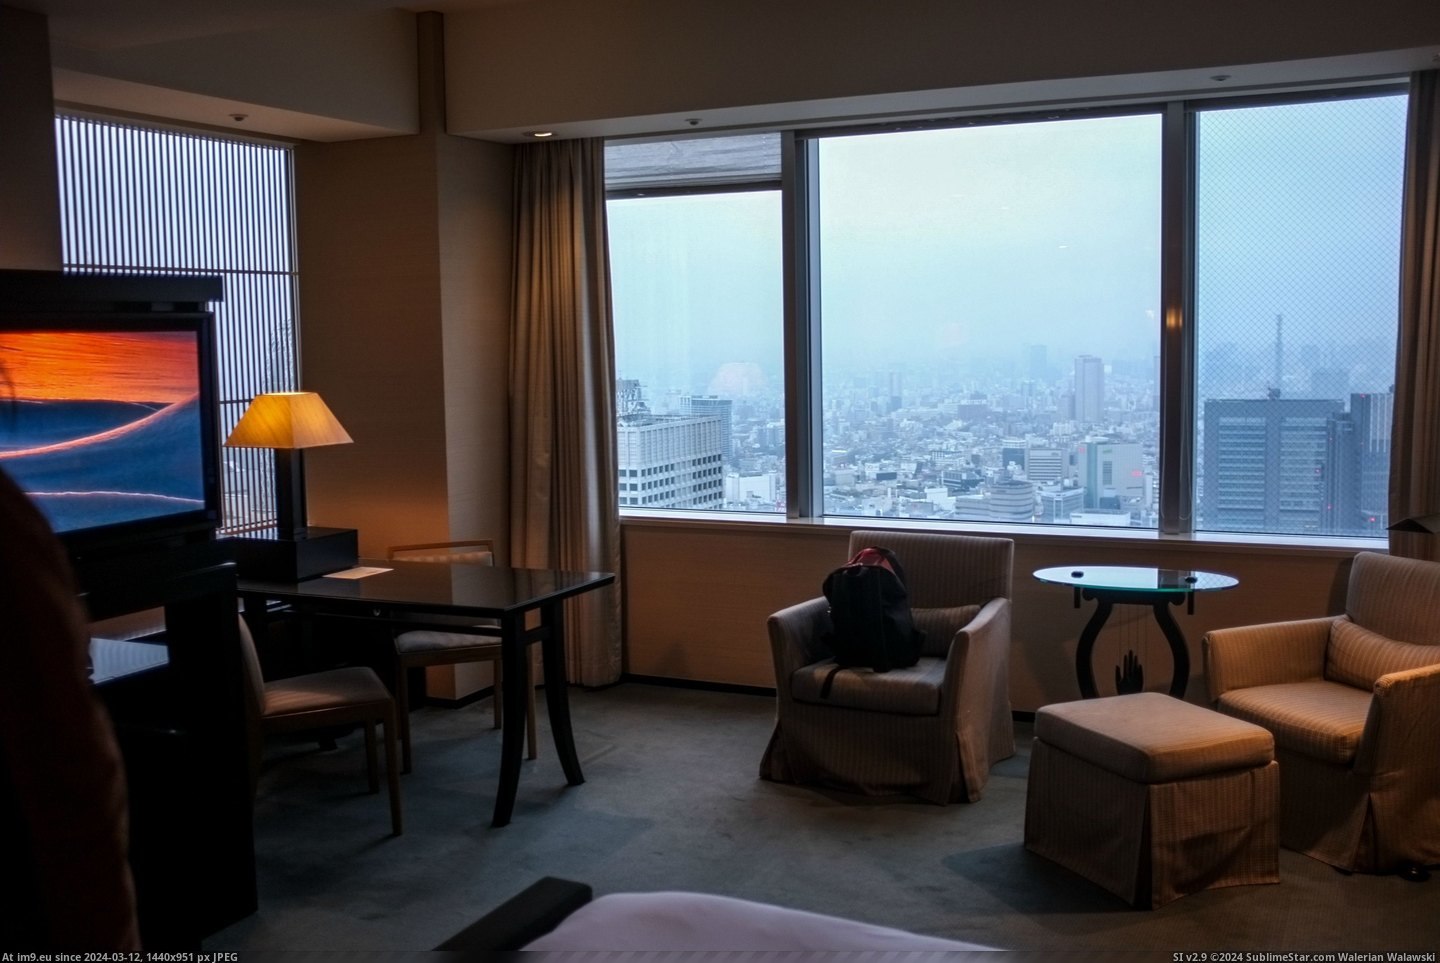 #Park #Room #Hotel #Request #Lost #Stay #Asked #Bill [Pics] I asked to stay in Bill Murray's hotel room from the film Lost In Translation [Tokyo, Park Hyatt] My request was granted. Pic. (Image of album My r/PICS favs))